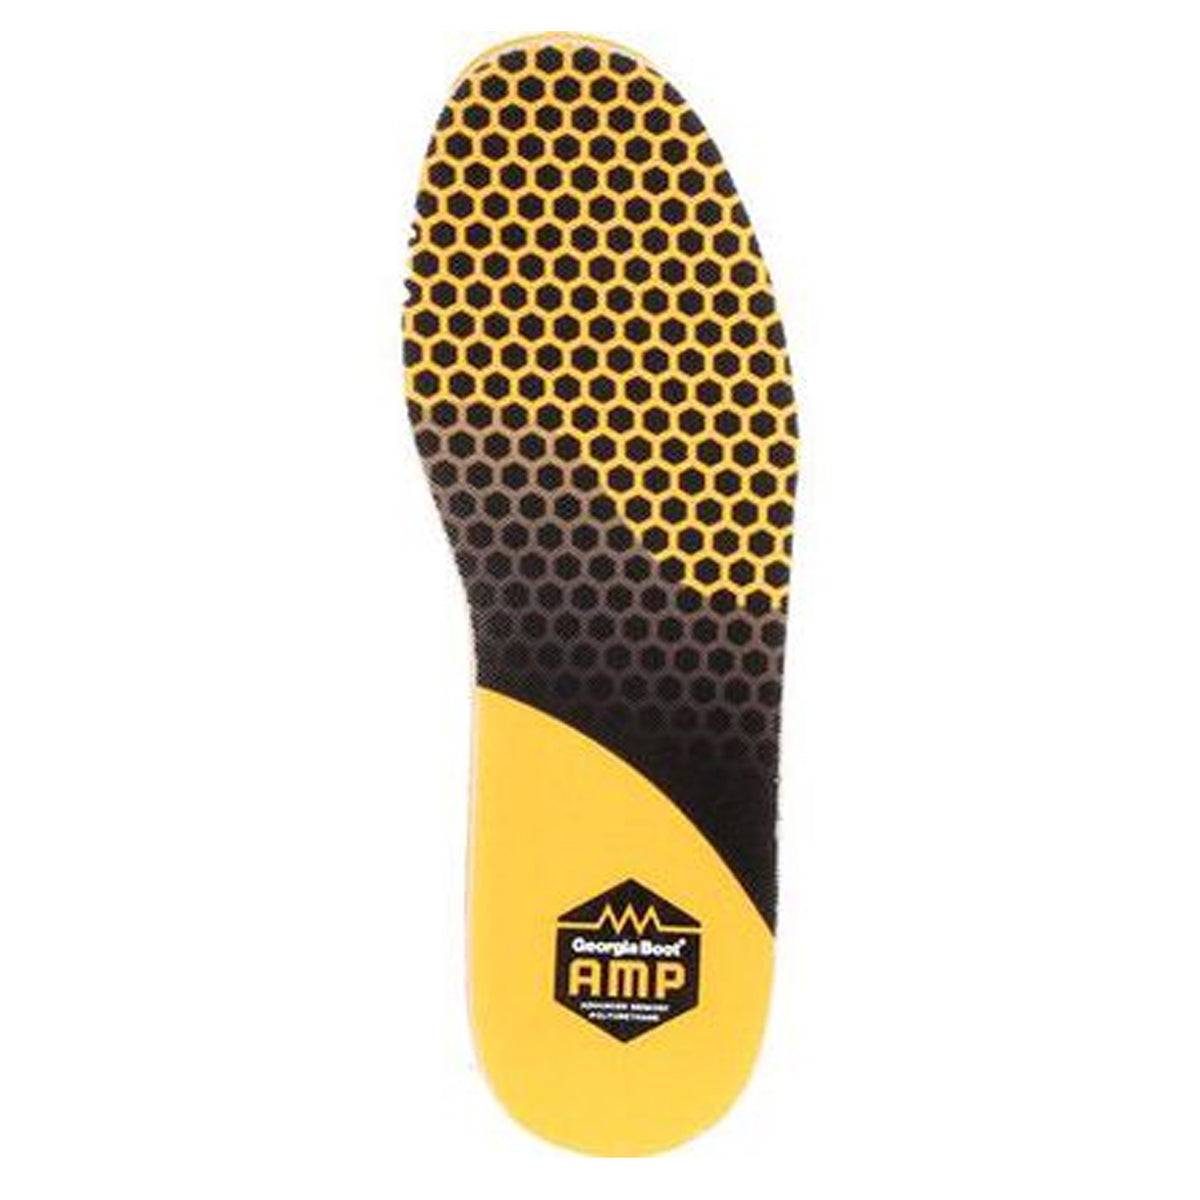 Georgia Boot Amp Insole with Memory Foam - Work World - Workwear, Work Boots, Safety Gear